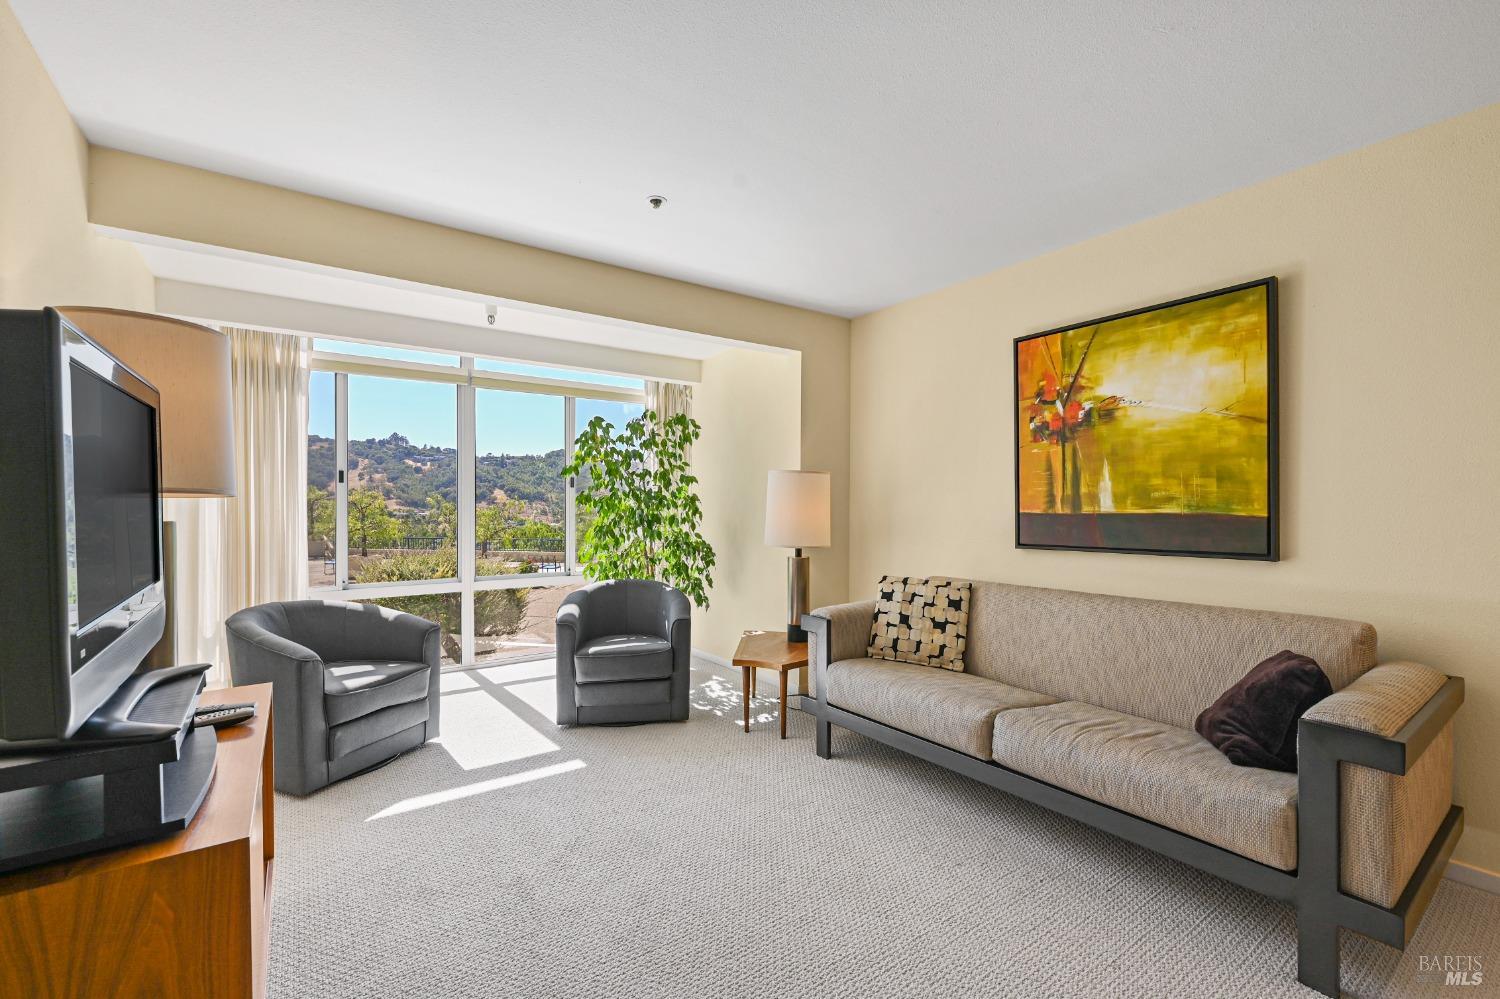 Photo of 100 Thorndale Dr #124 in San Rafael, CA